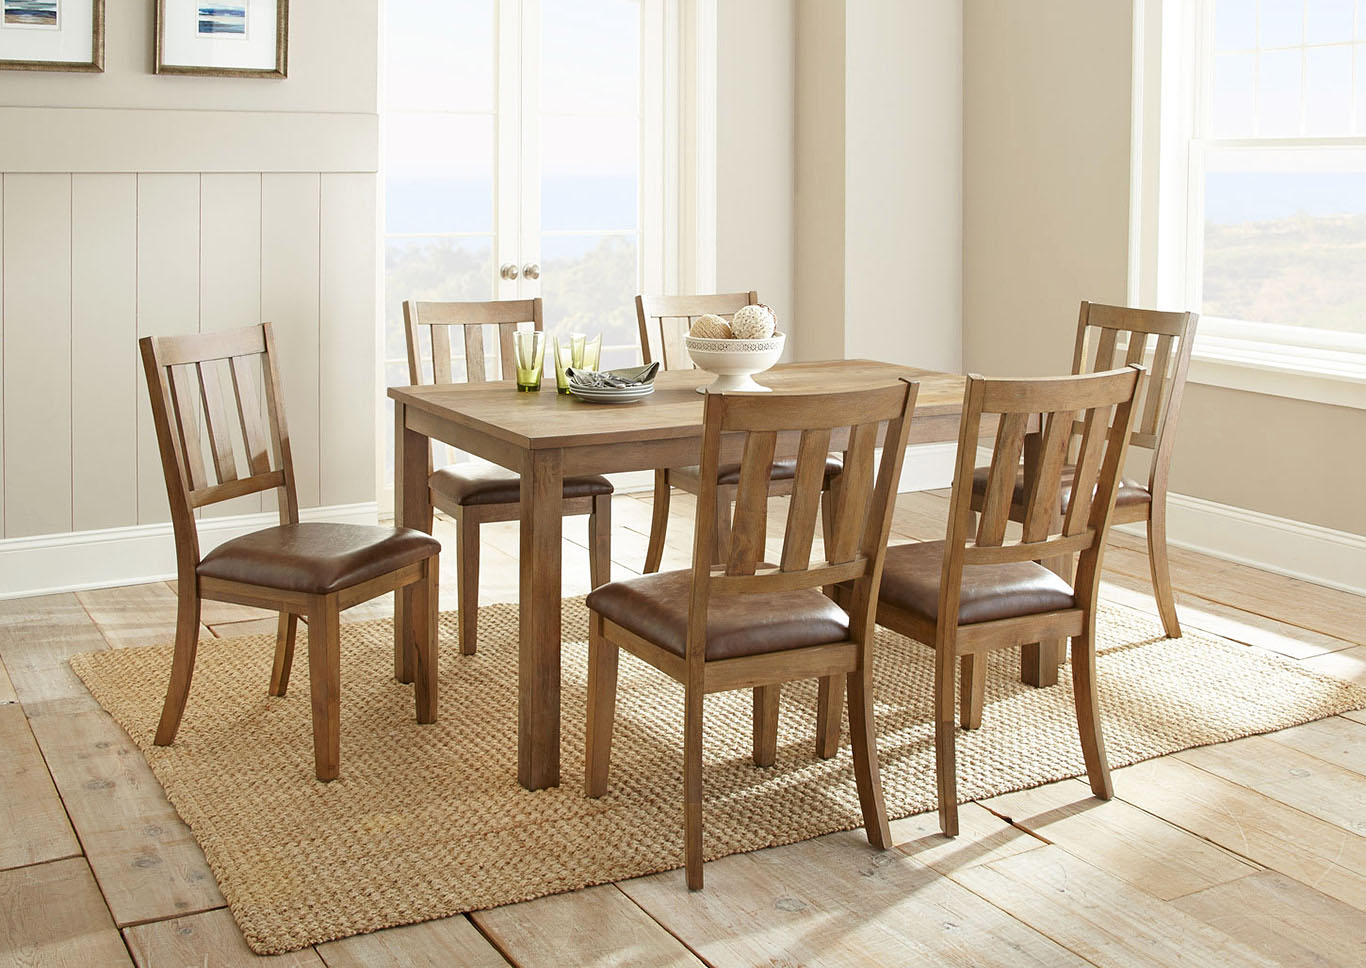 Ander Brown Rectangular Dining Set W/ 6 Chairs,Steve Silver